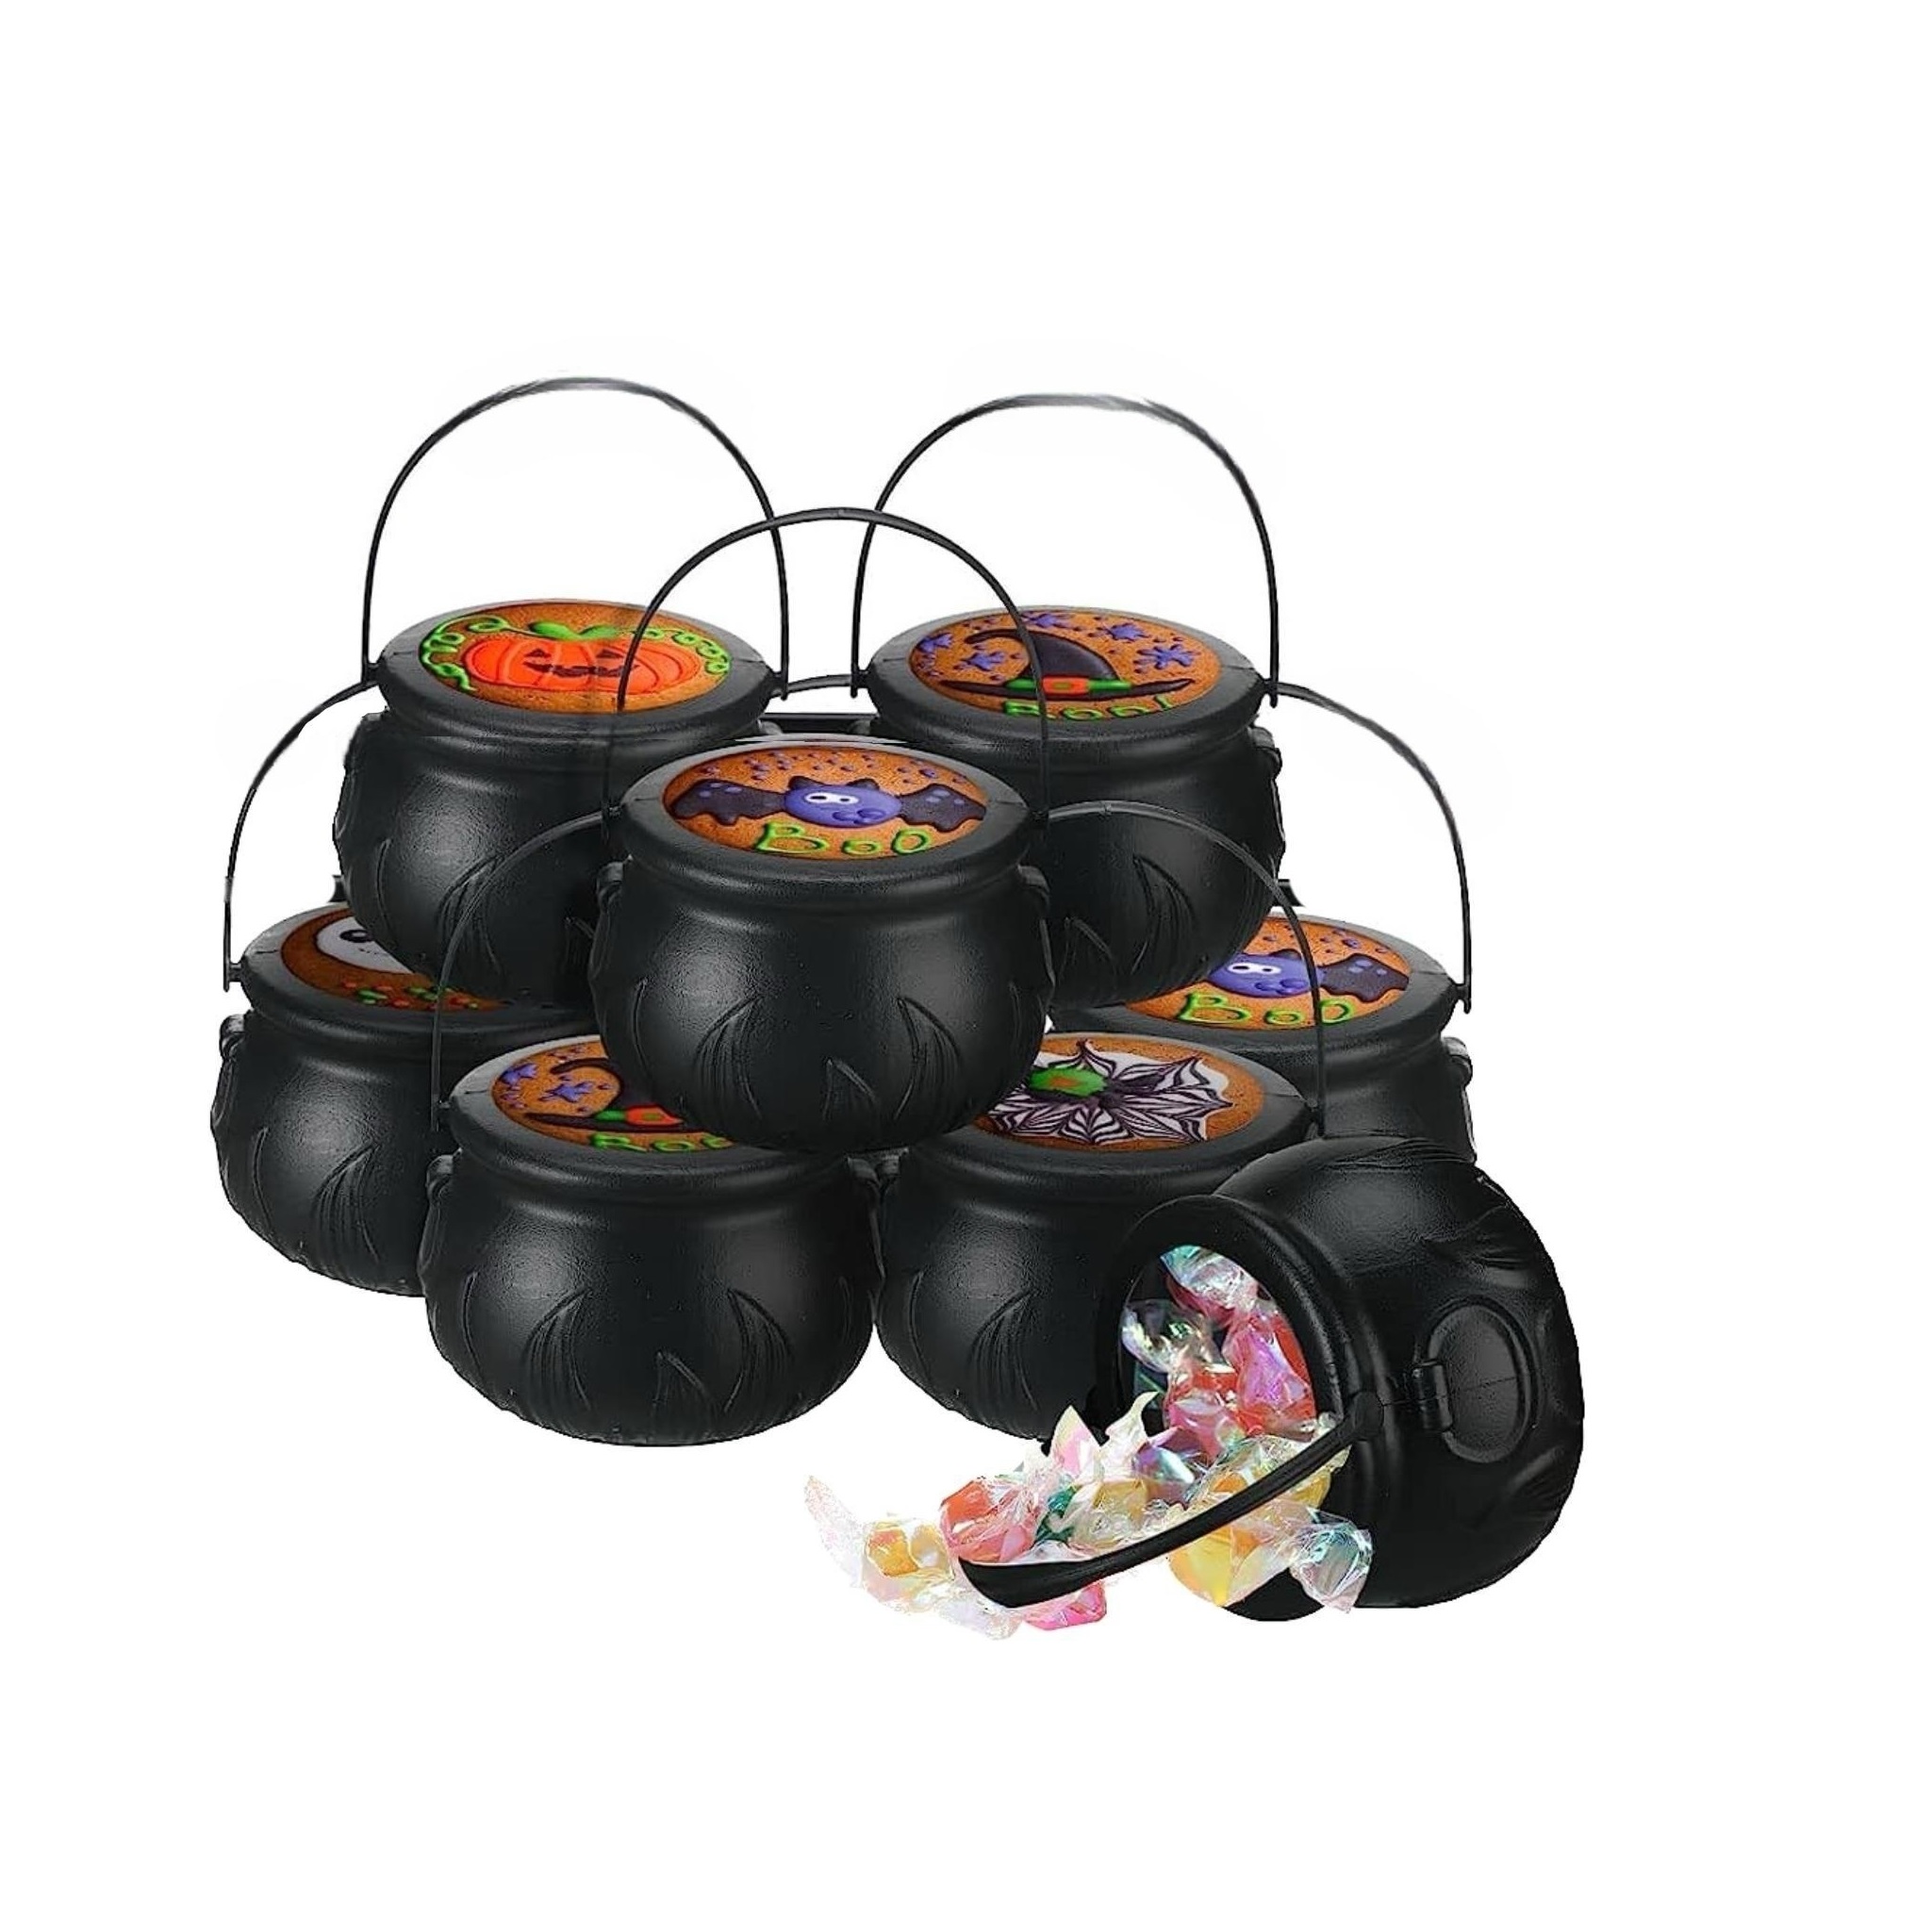 Halloween Decor - Halloween Party Decorations - Set of 3 Witches Cauldron  Serving Bowls on Rack - Black Plastic Hocus Pocus Candy Bucket Cauldron for  Indoor Outdoor Home Kitchen Decoration